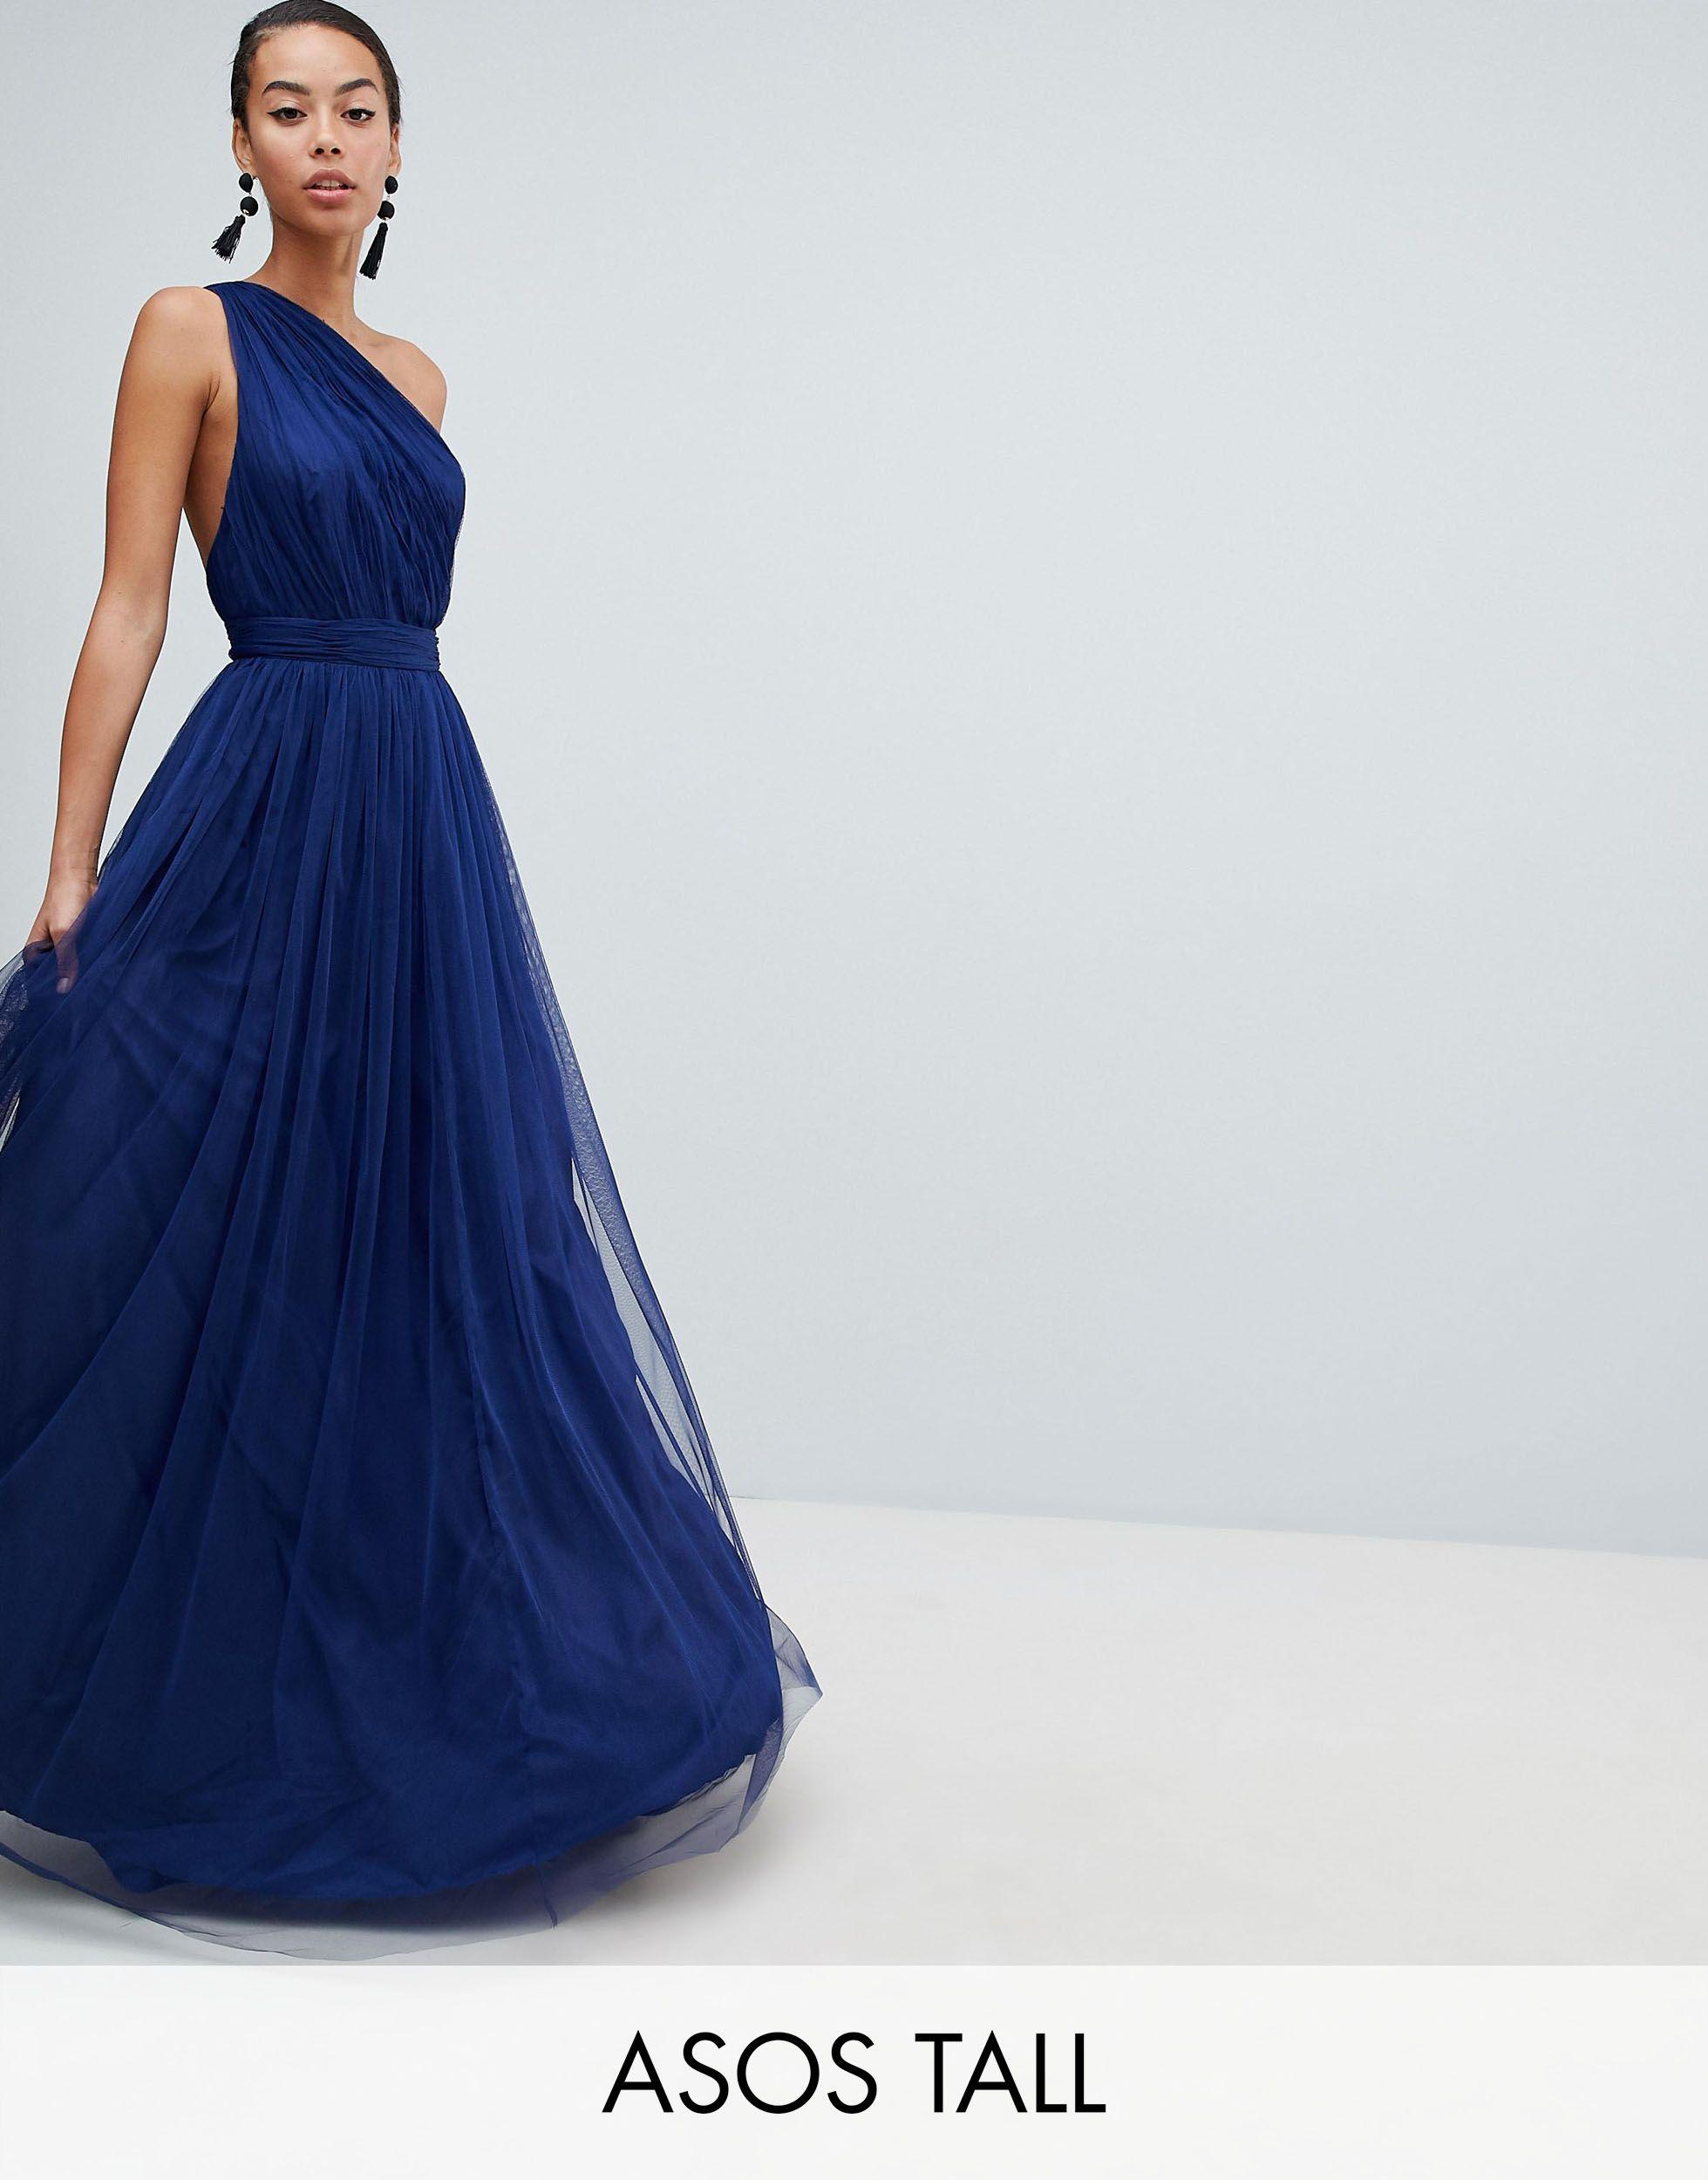 Page 25 - Evening Dresses | Ball Gowns & Black Evening Dresses | ASOS